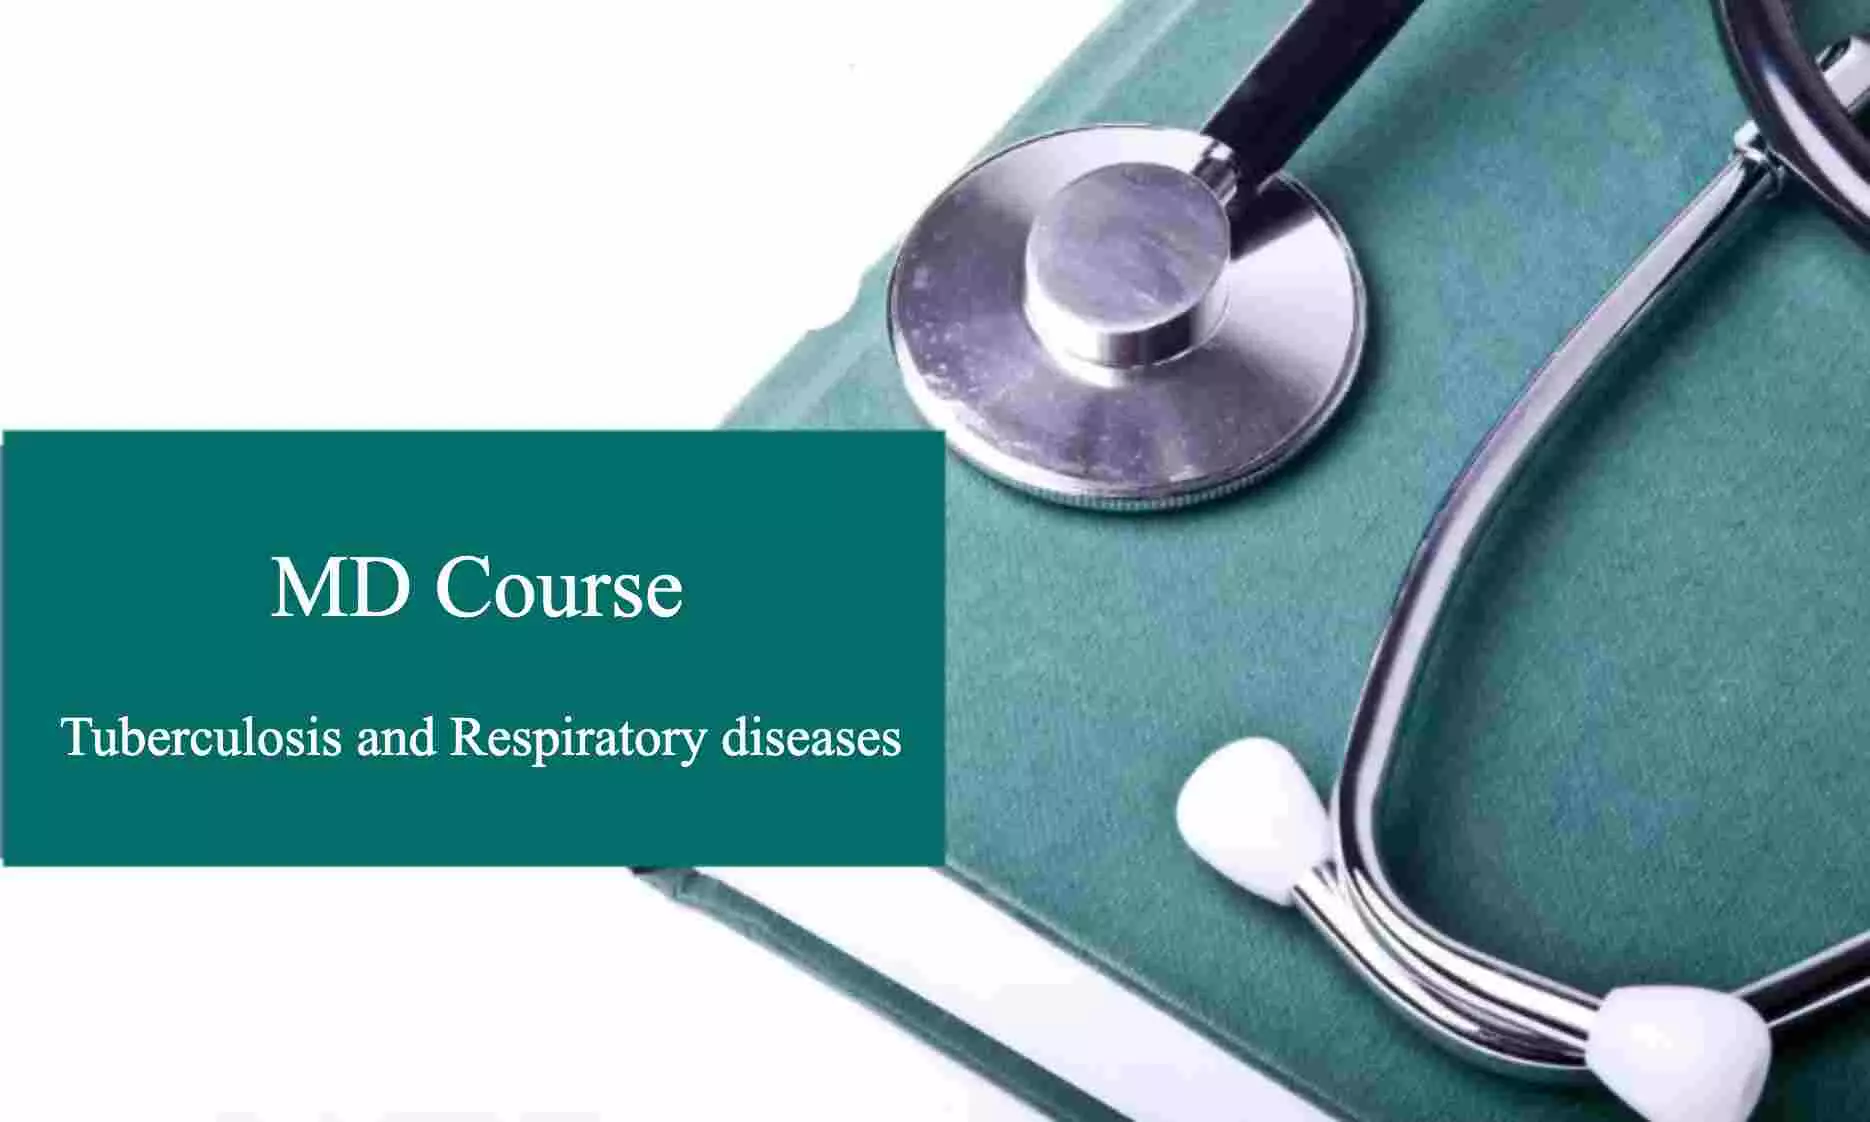 GMCH Chandigarh to begin MD Tuberculosis and Respiratory Diseases course